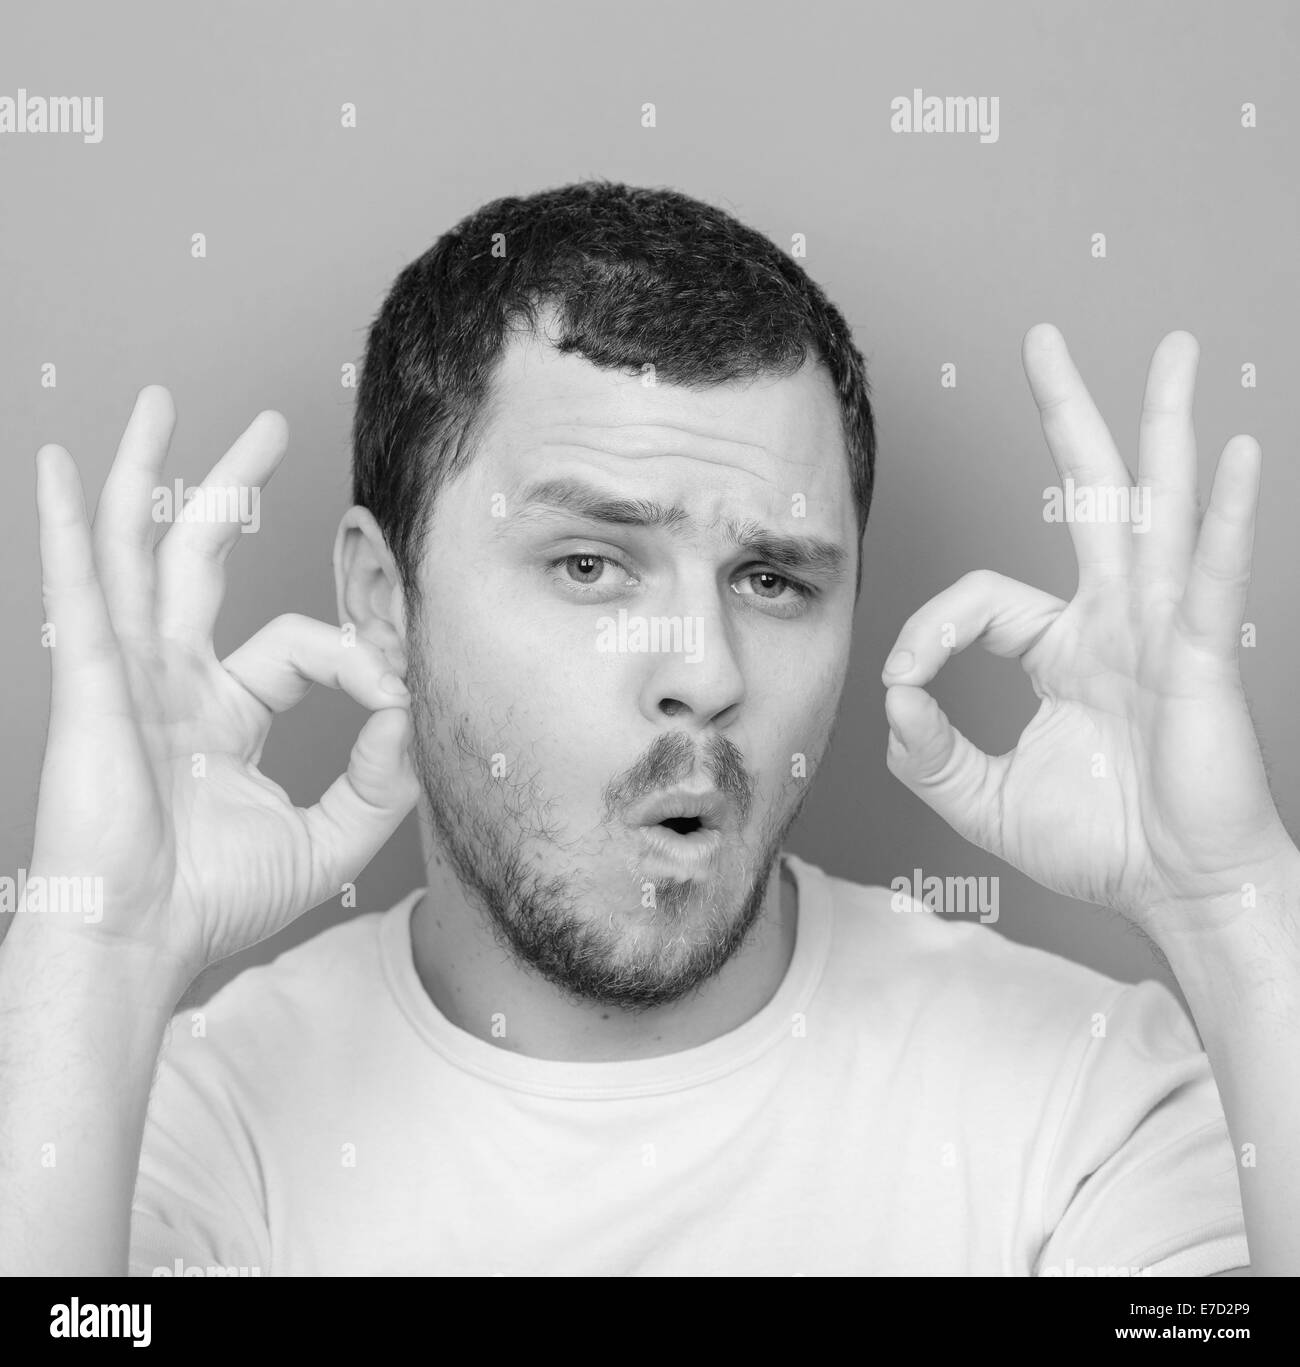 Portrait of funny man showing OK gesture with hands - Monocrome or black and white portrait Stock Photo